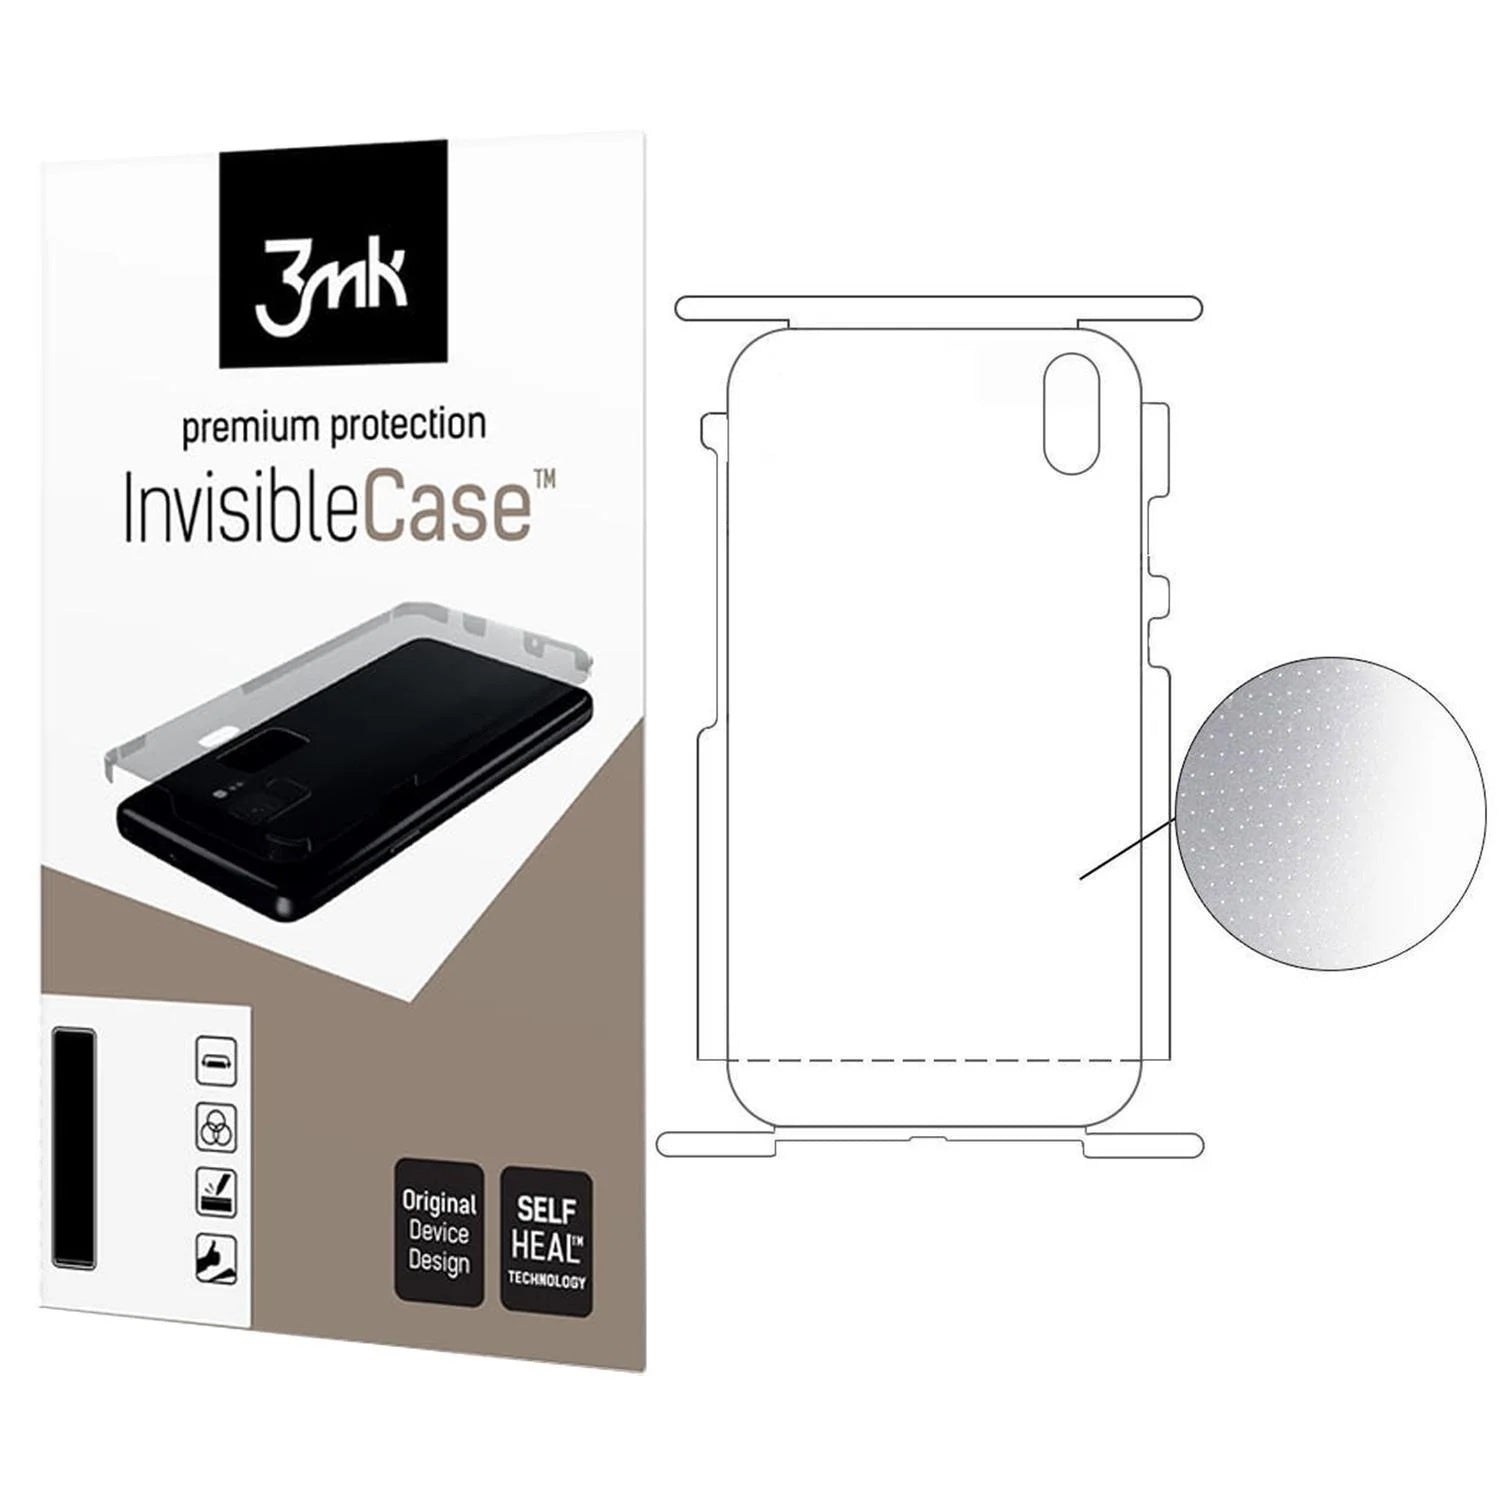 3mk Protective Film Case iPhone X Invisible High Grip